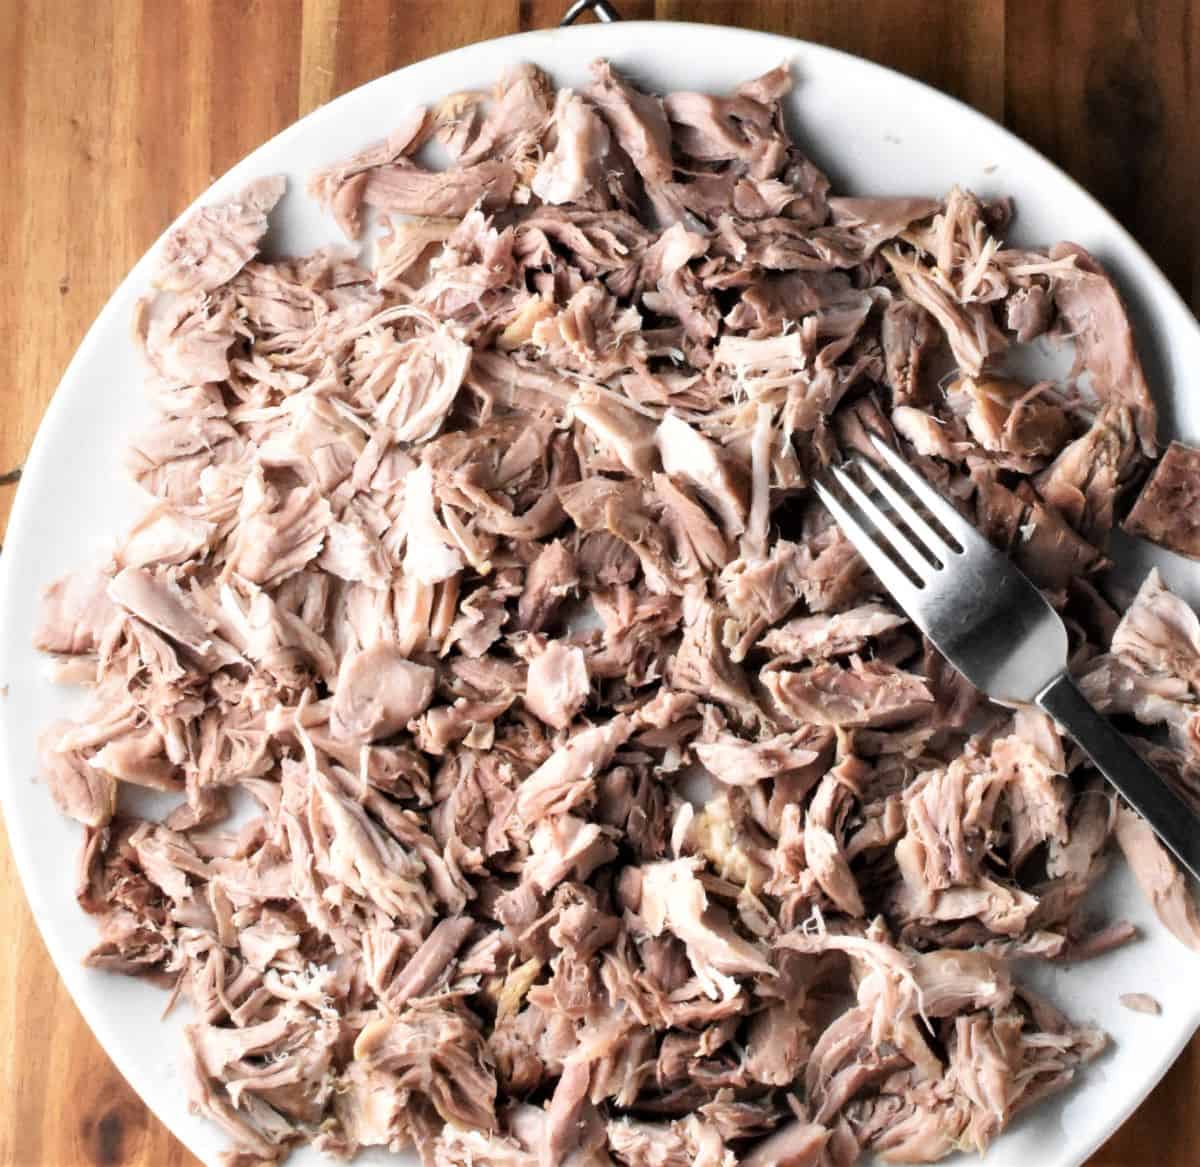 Chopped cooked meat on large plate with fork.